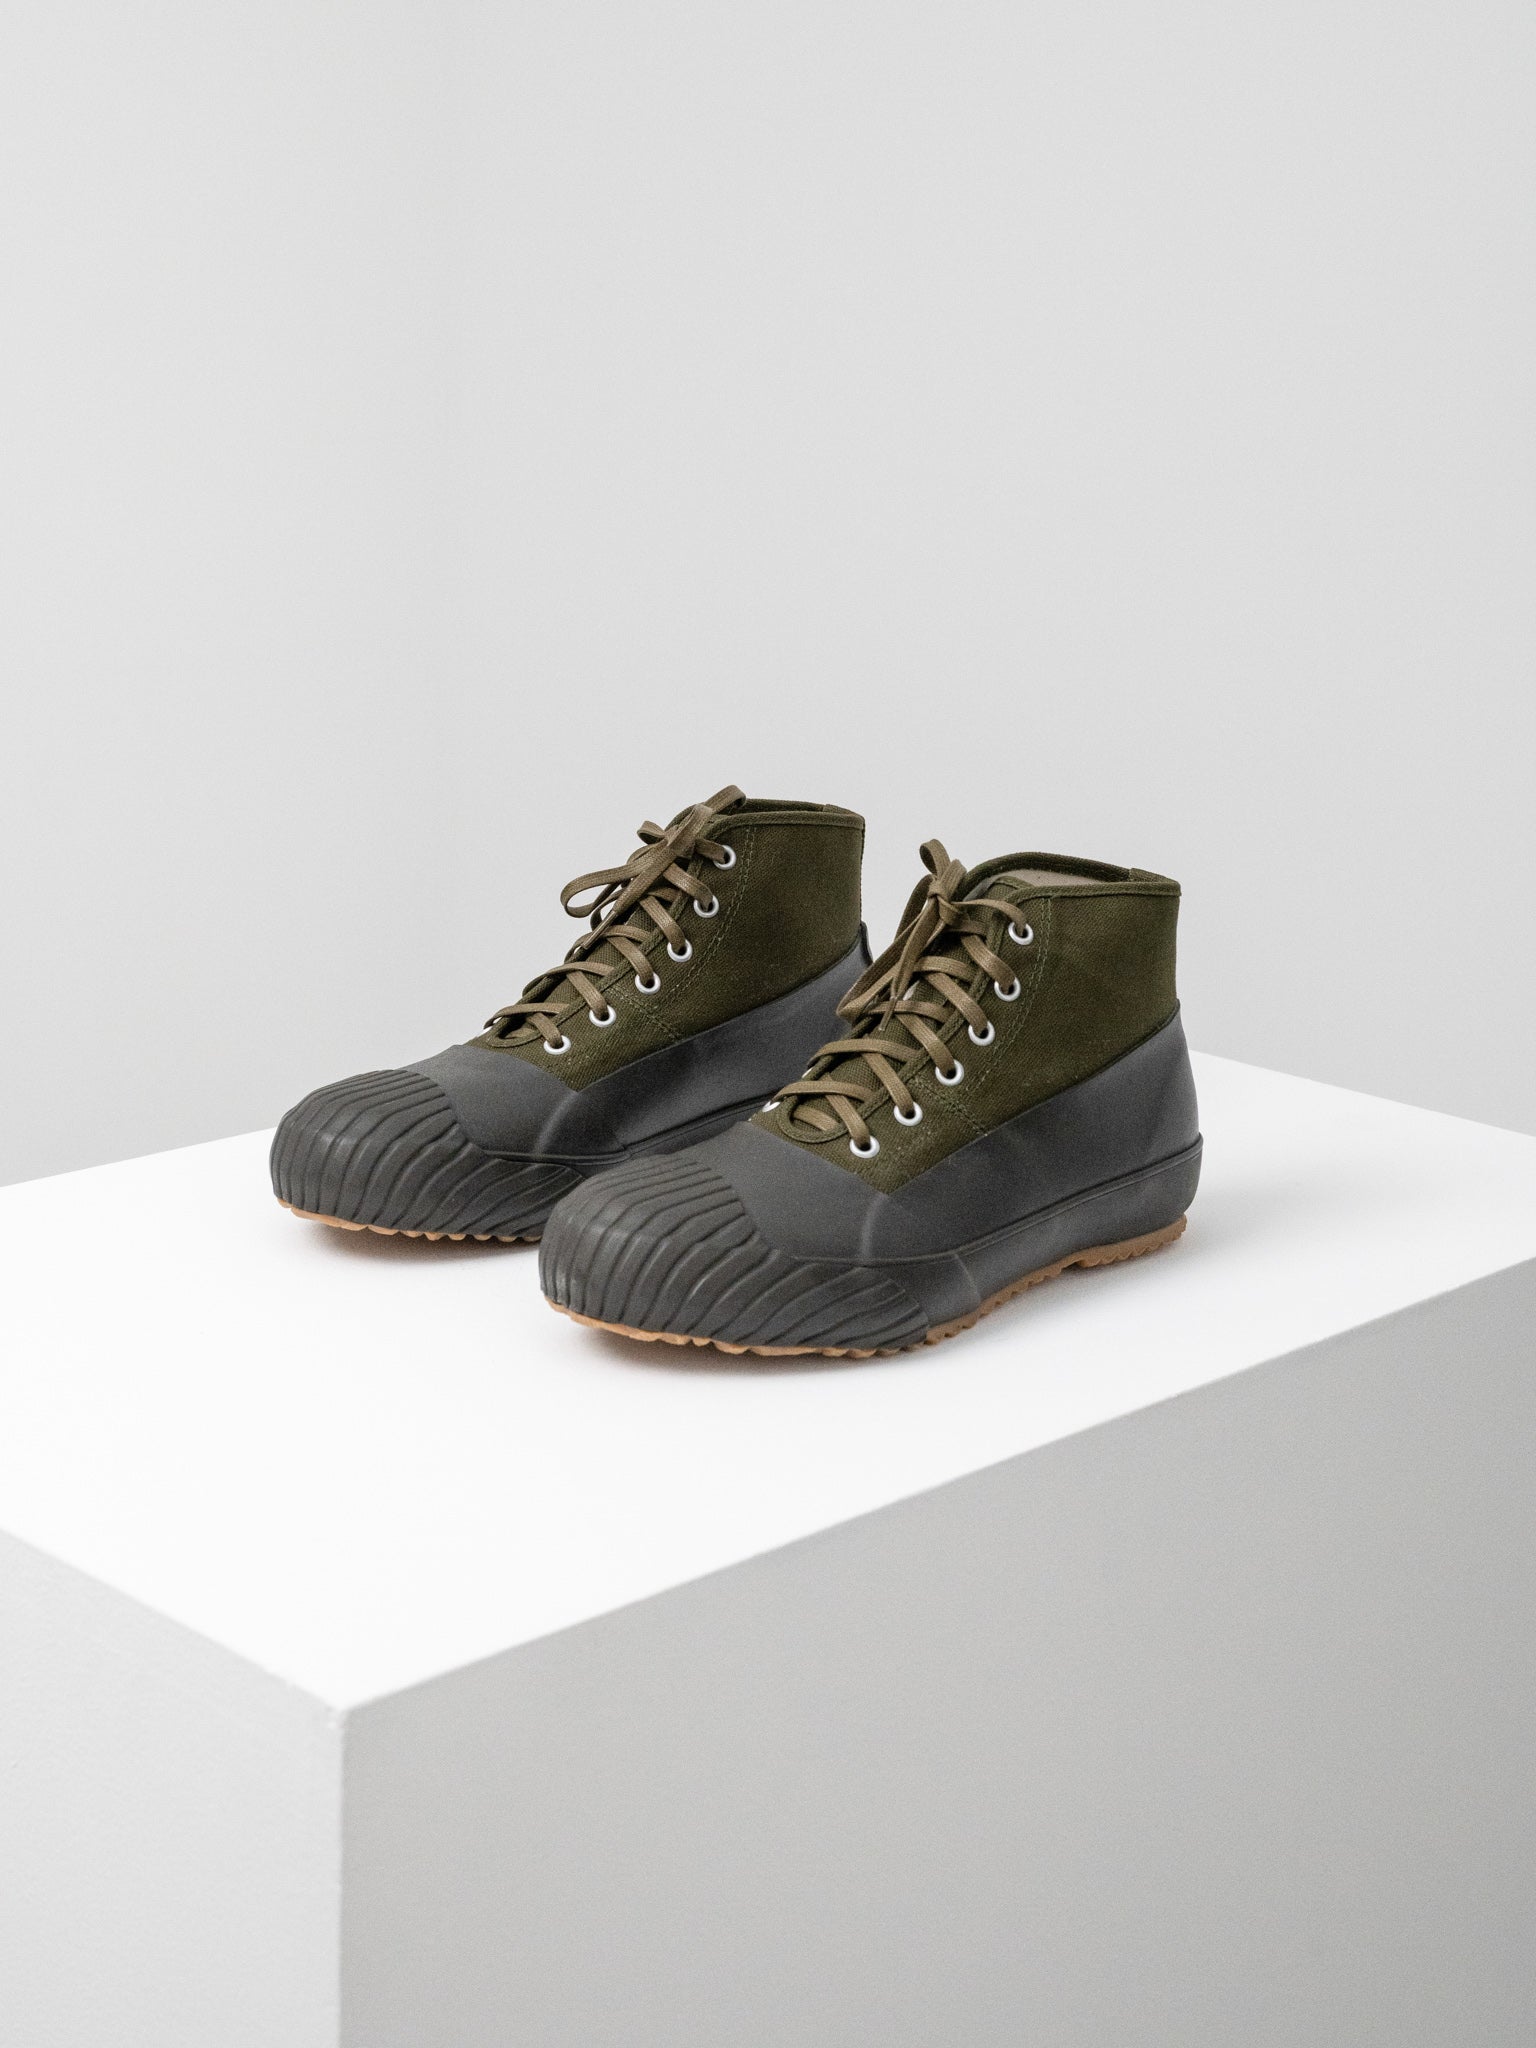 Moonstar Alweather Boots (two colour options)